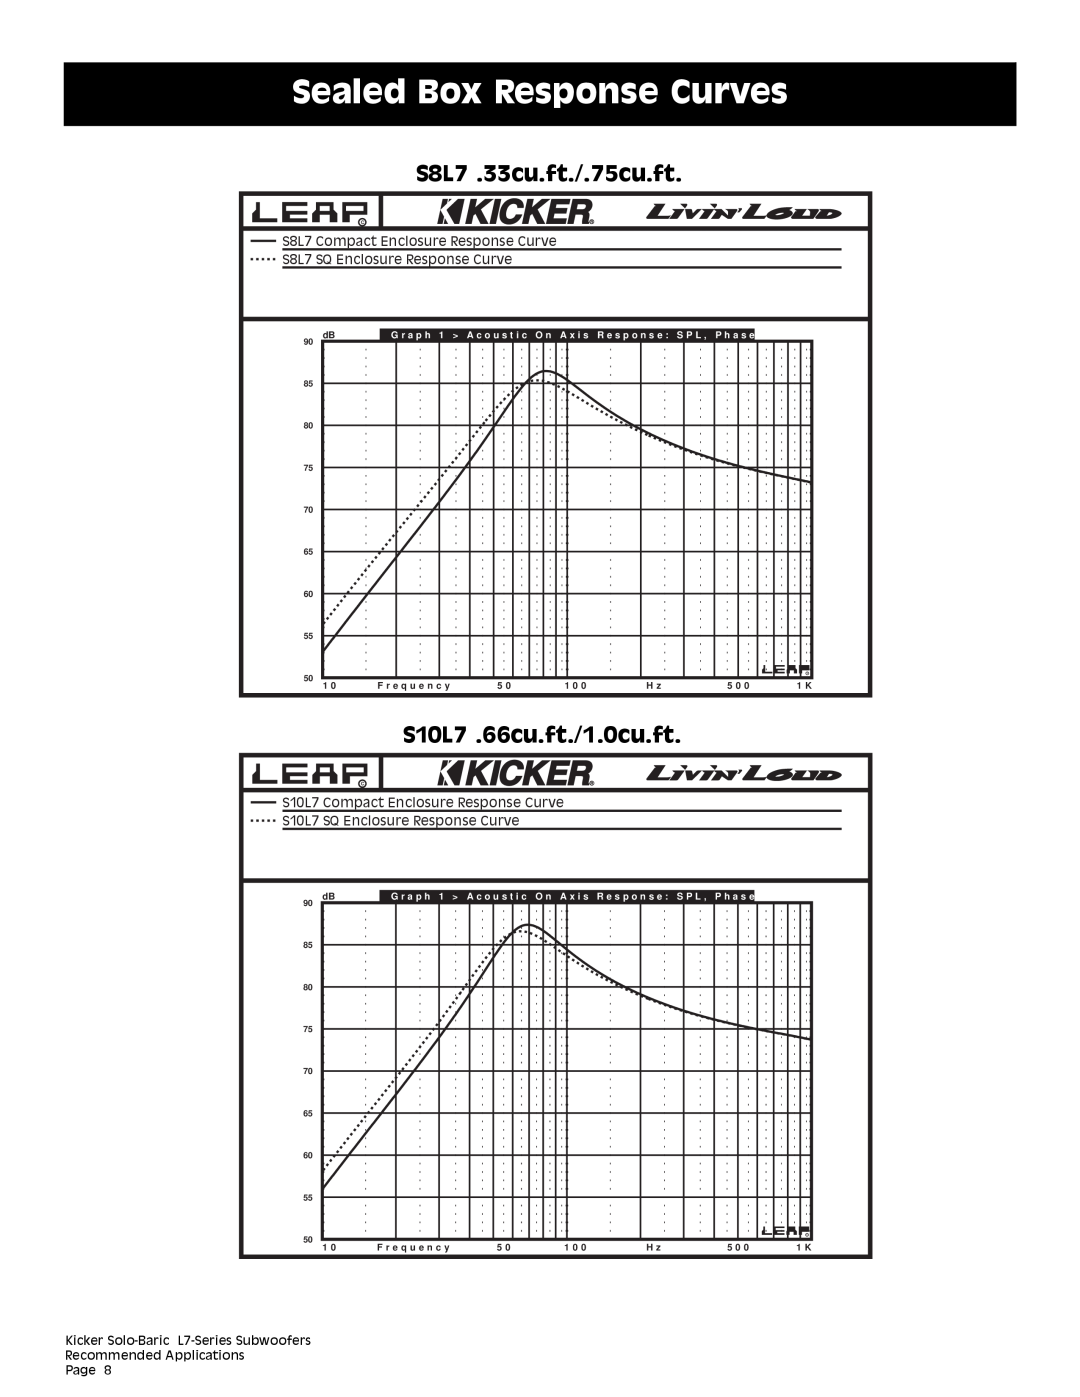 Kicker Sealed Box Response Curves, S8L7 .33cu.ft./.75cu.ft, S10L7 .66cu.ft./1.0cu.ft, Recommended Applications Page 